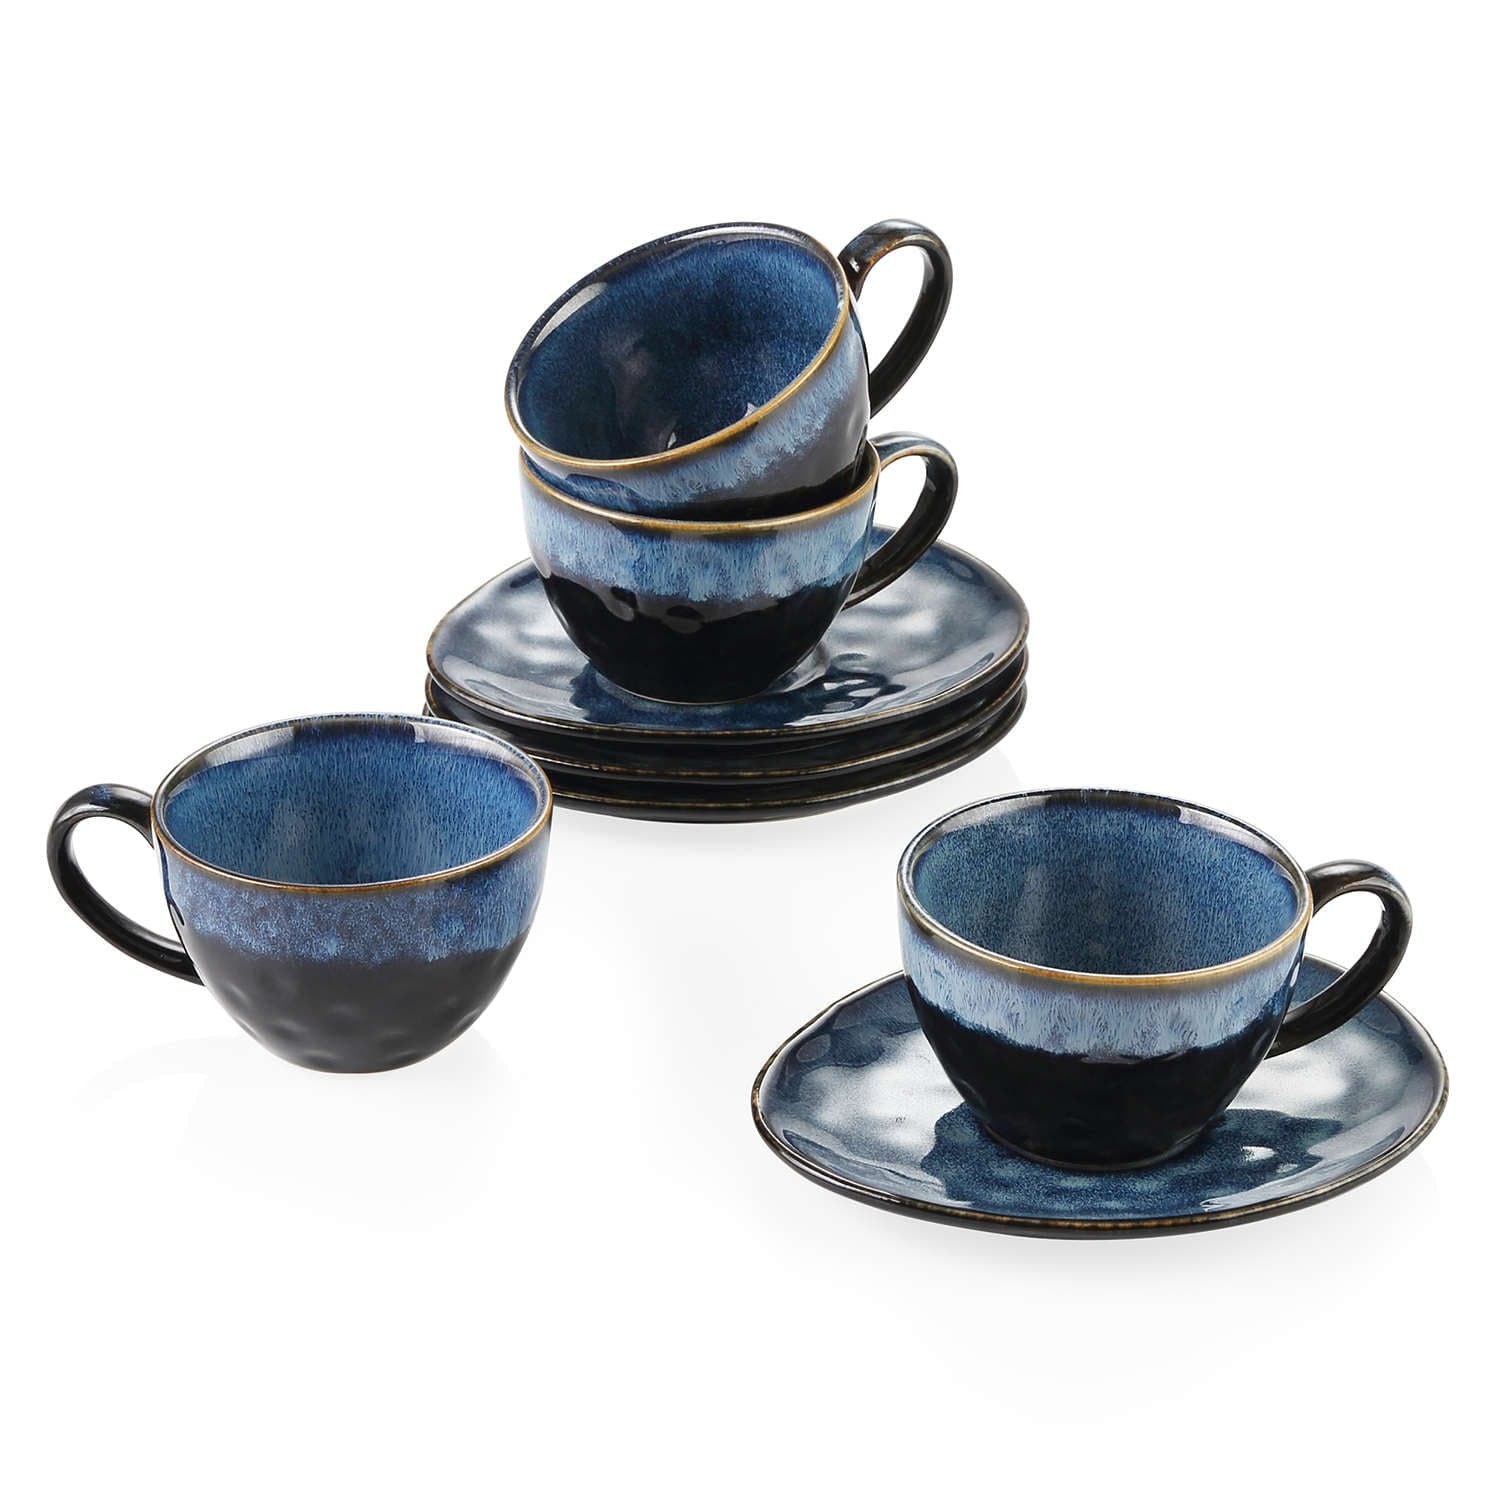 Starry Cups and Saucers Set of 4